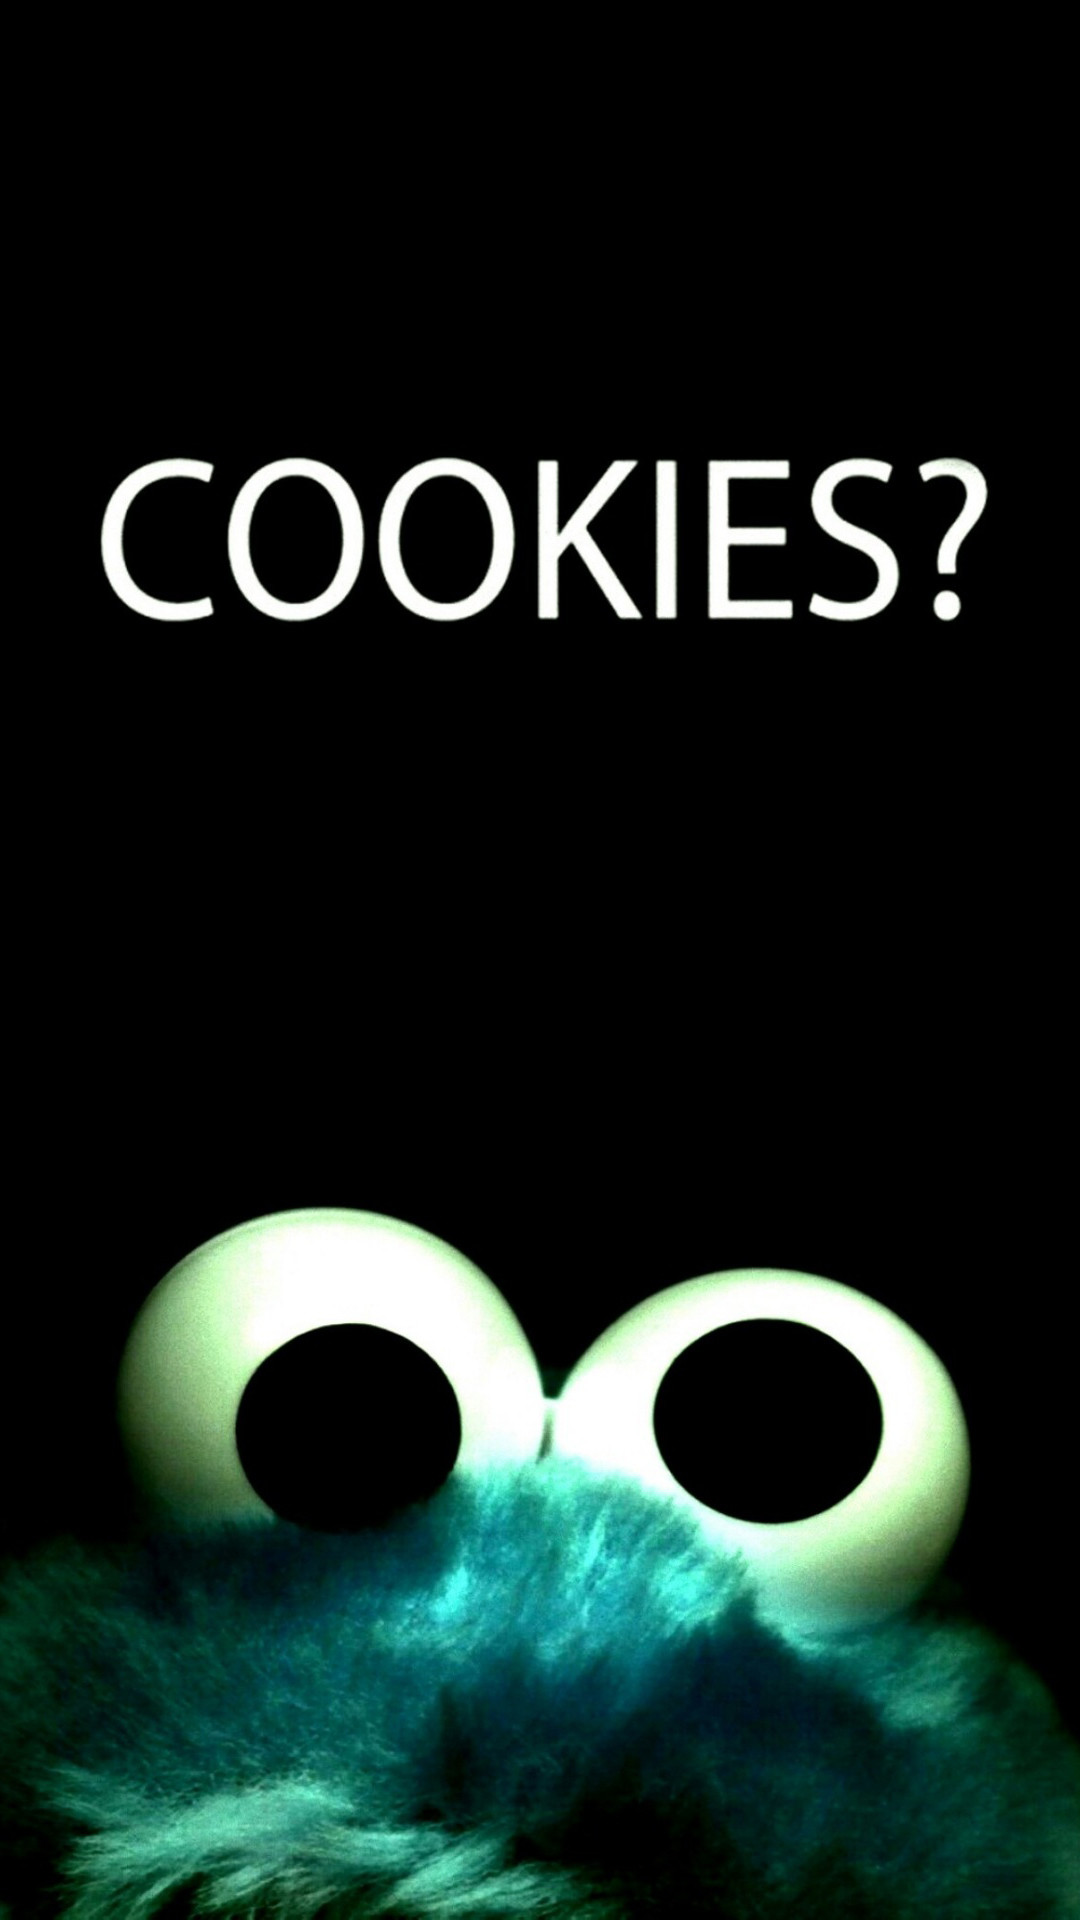 1080x1920 Cookies Cookie Monster Android Wallpaper ...